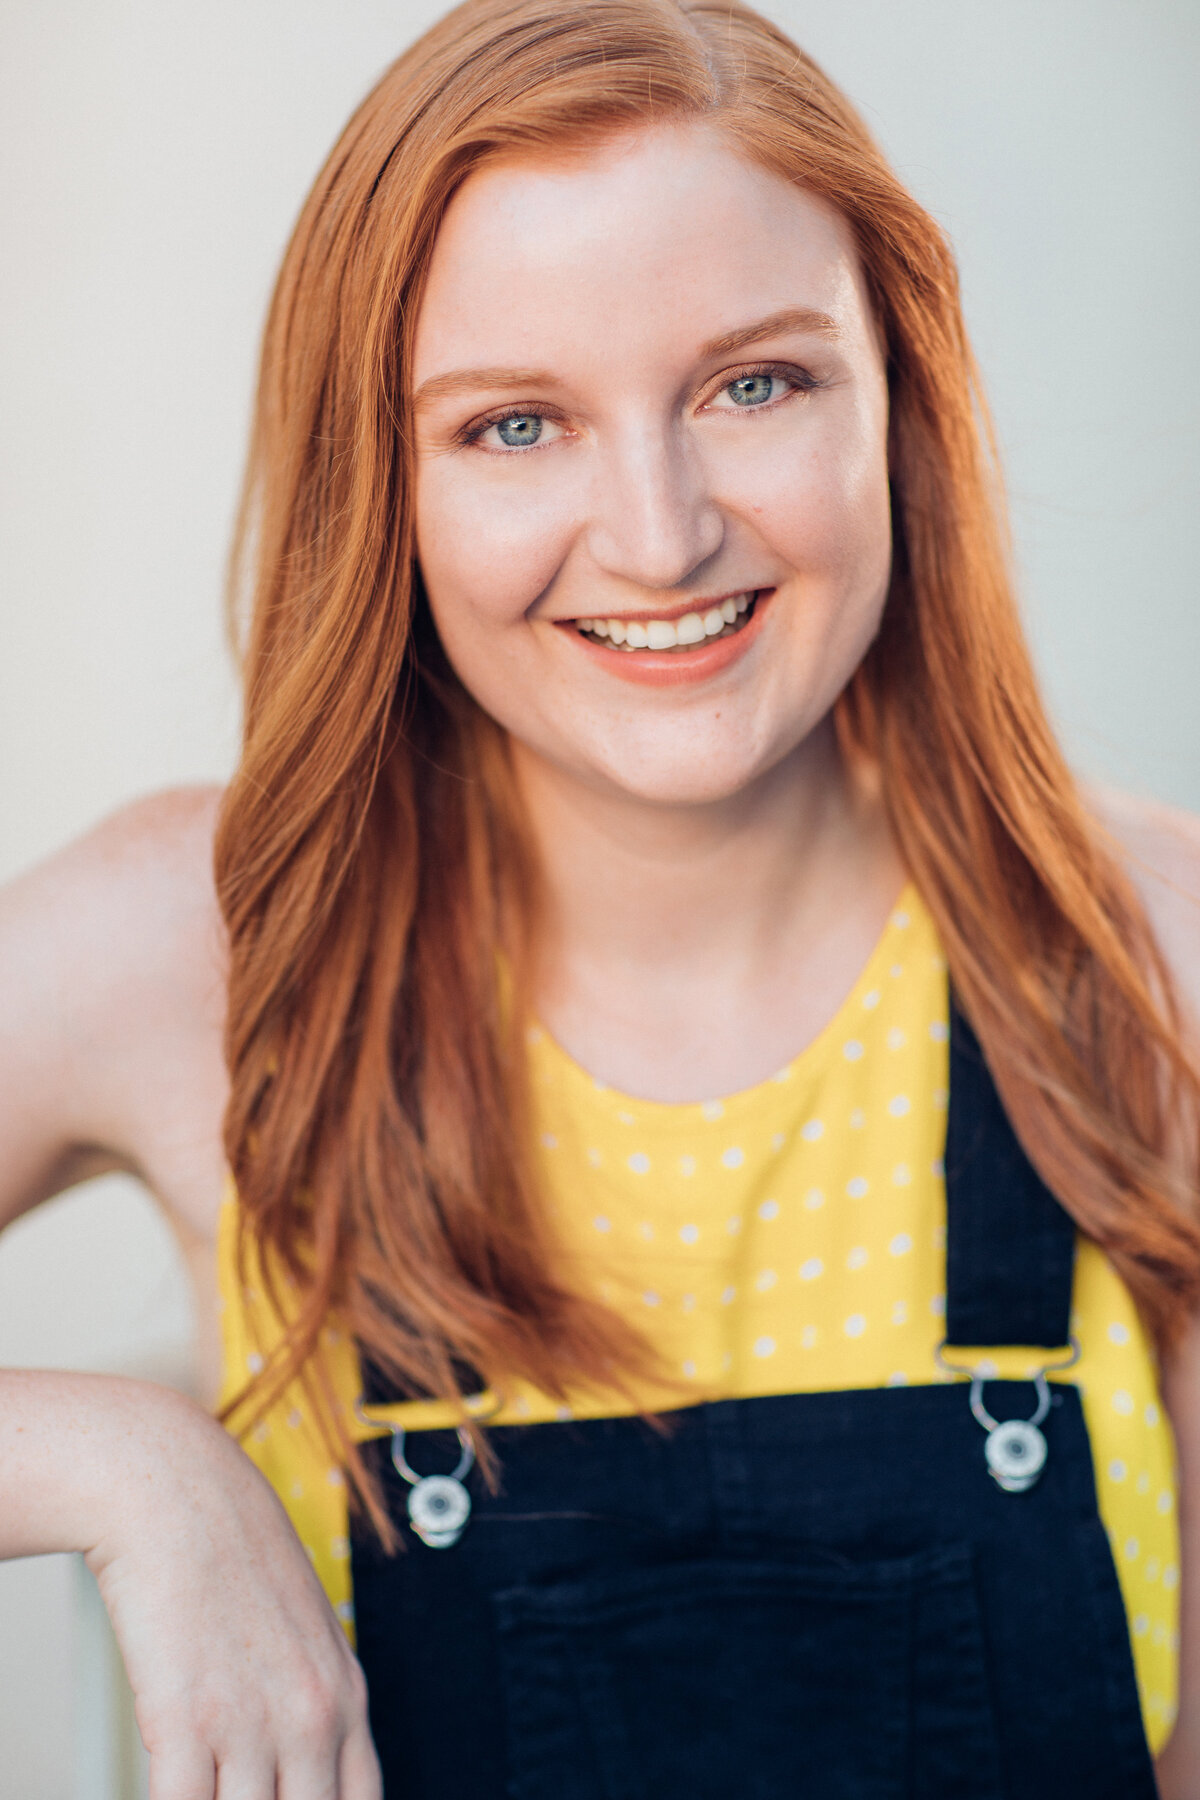 Headshot Photograph Of Young Woman In Dark Blue Jumper And Yellow Sleeveless Los Angeles